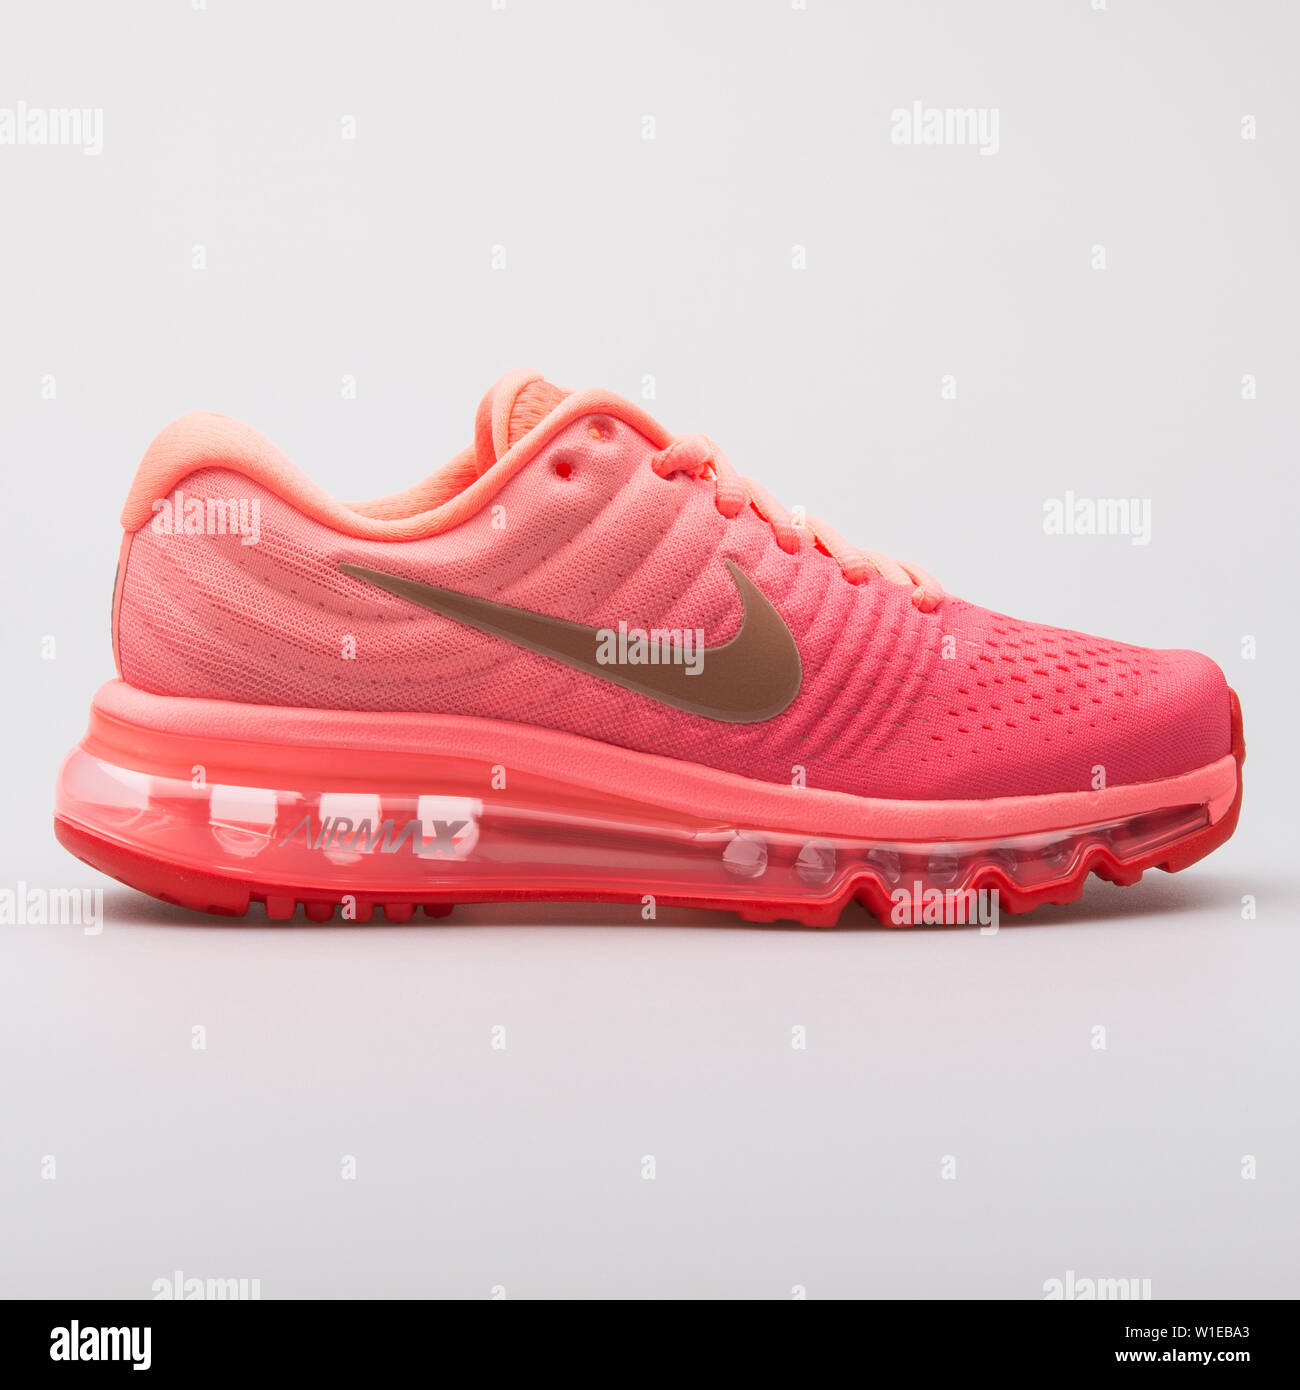 VIENNA, AUSTRIA - AUGUST 7, 2017: Nike Air Max 2017 orange, pink and red  sneaker on white background Stock Photo - Alamy